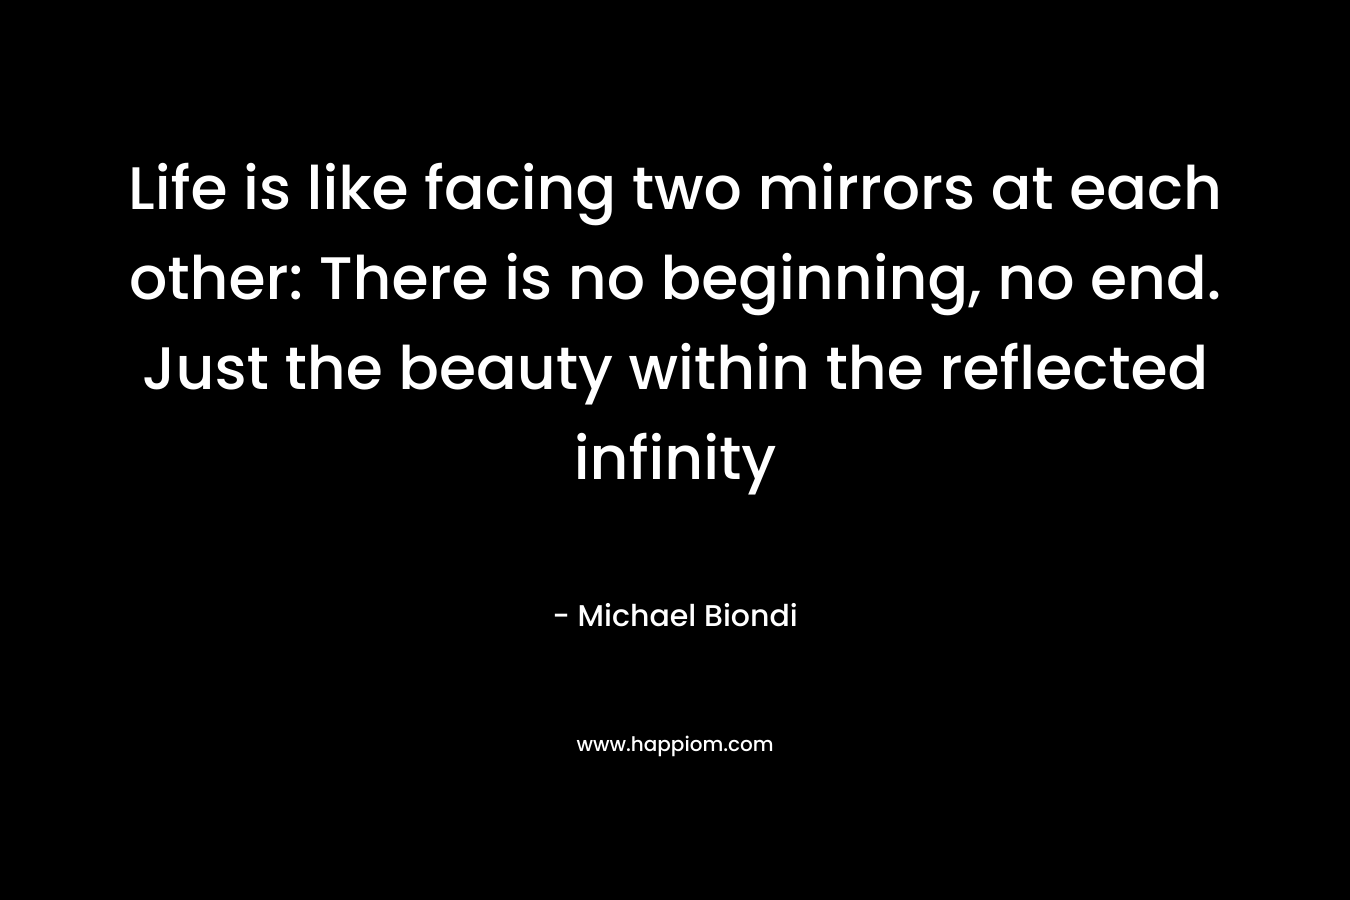 Life is like facing two mirrors at each other: There is no beginning, no end. Just the beauty within the reflected infinity